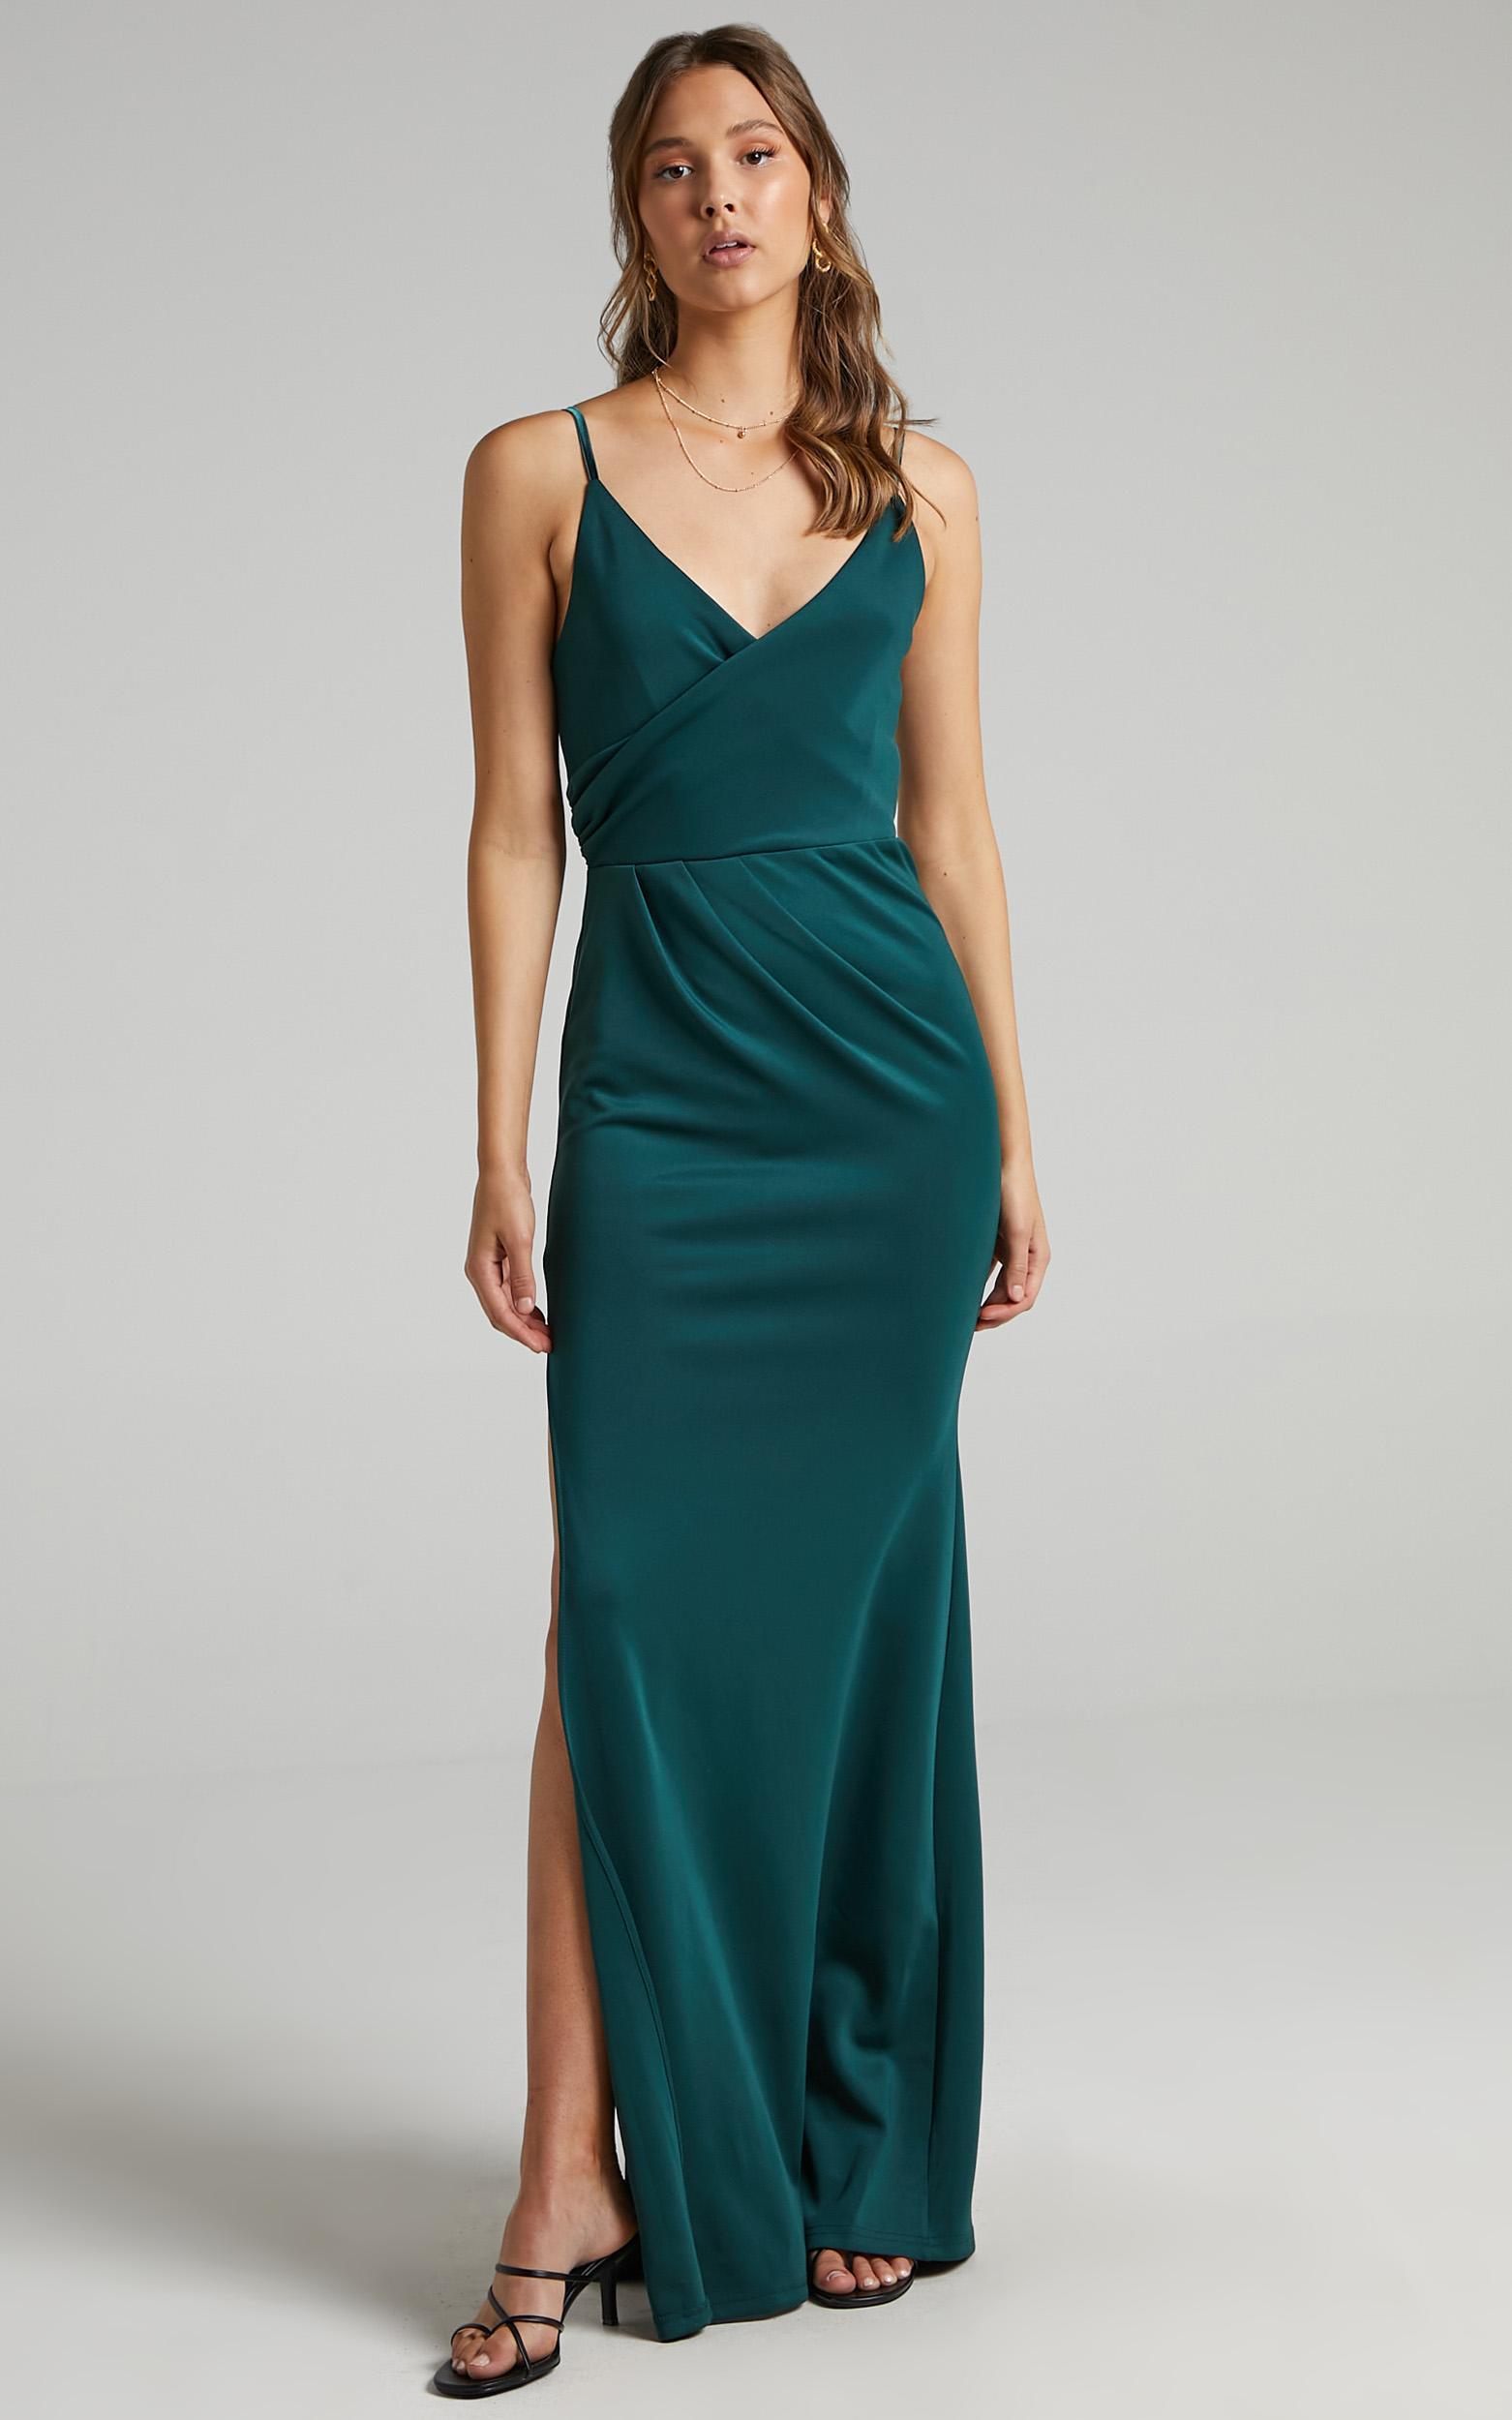 Linking Love Slip Maxi Dress in Emerald - 20, GRN1, hi-res image number null